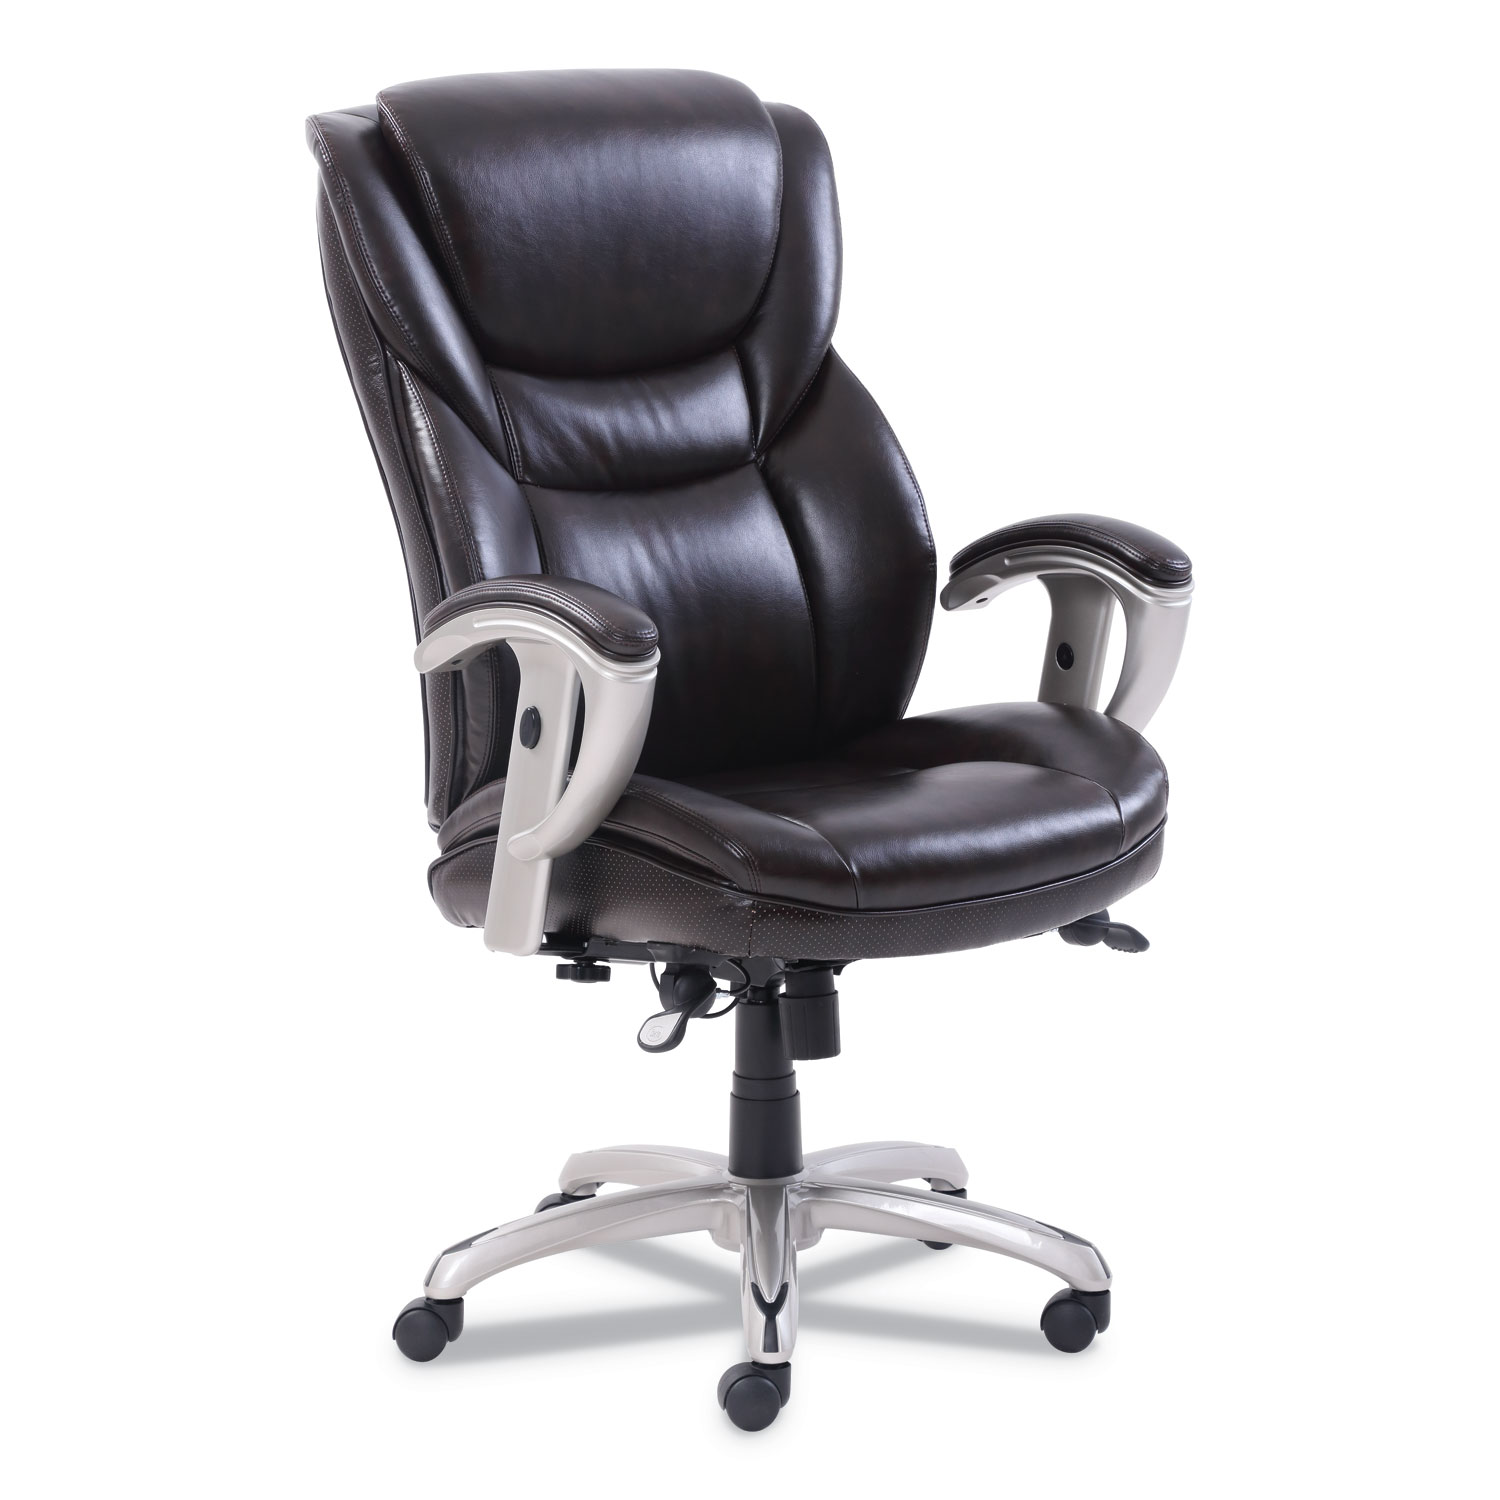  SertaPedic 49710BRW Emerson Executive Task Chair, Supports up to 300 lbs., Brown Seat/Brown Back, Silver Base (SRJ49710BRW) 